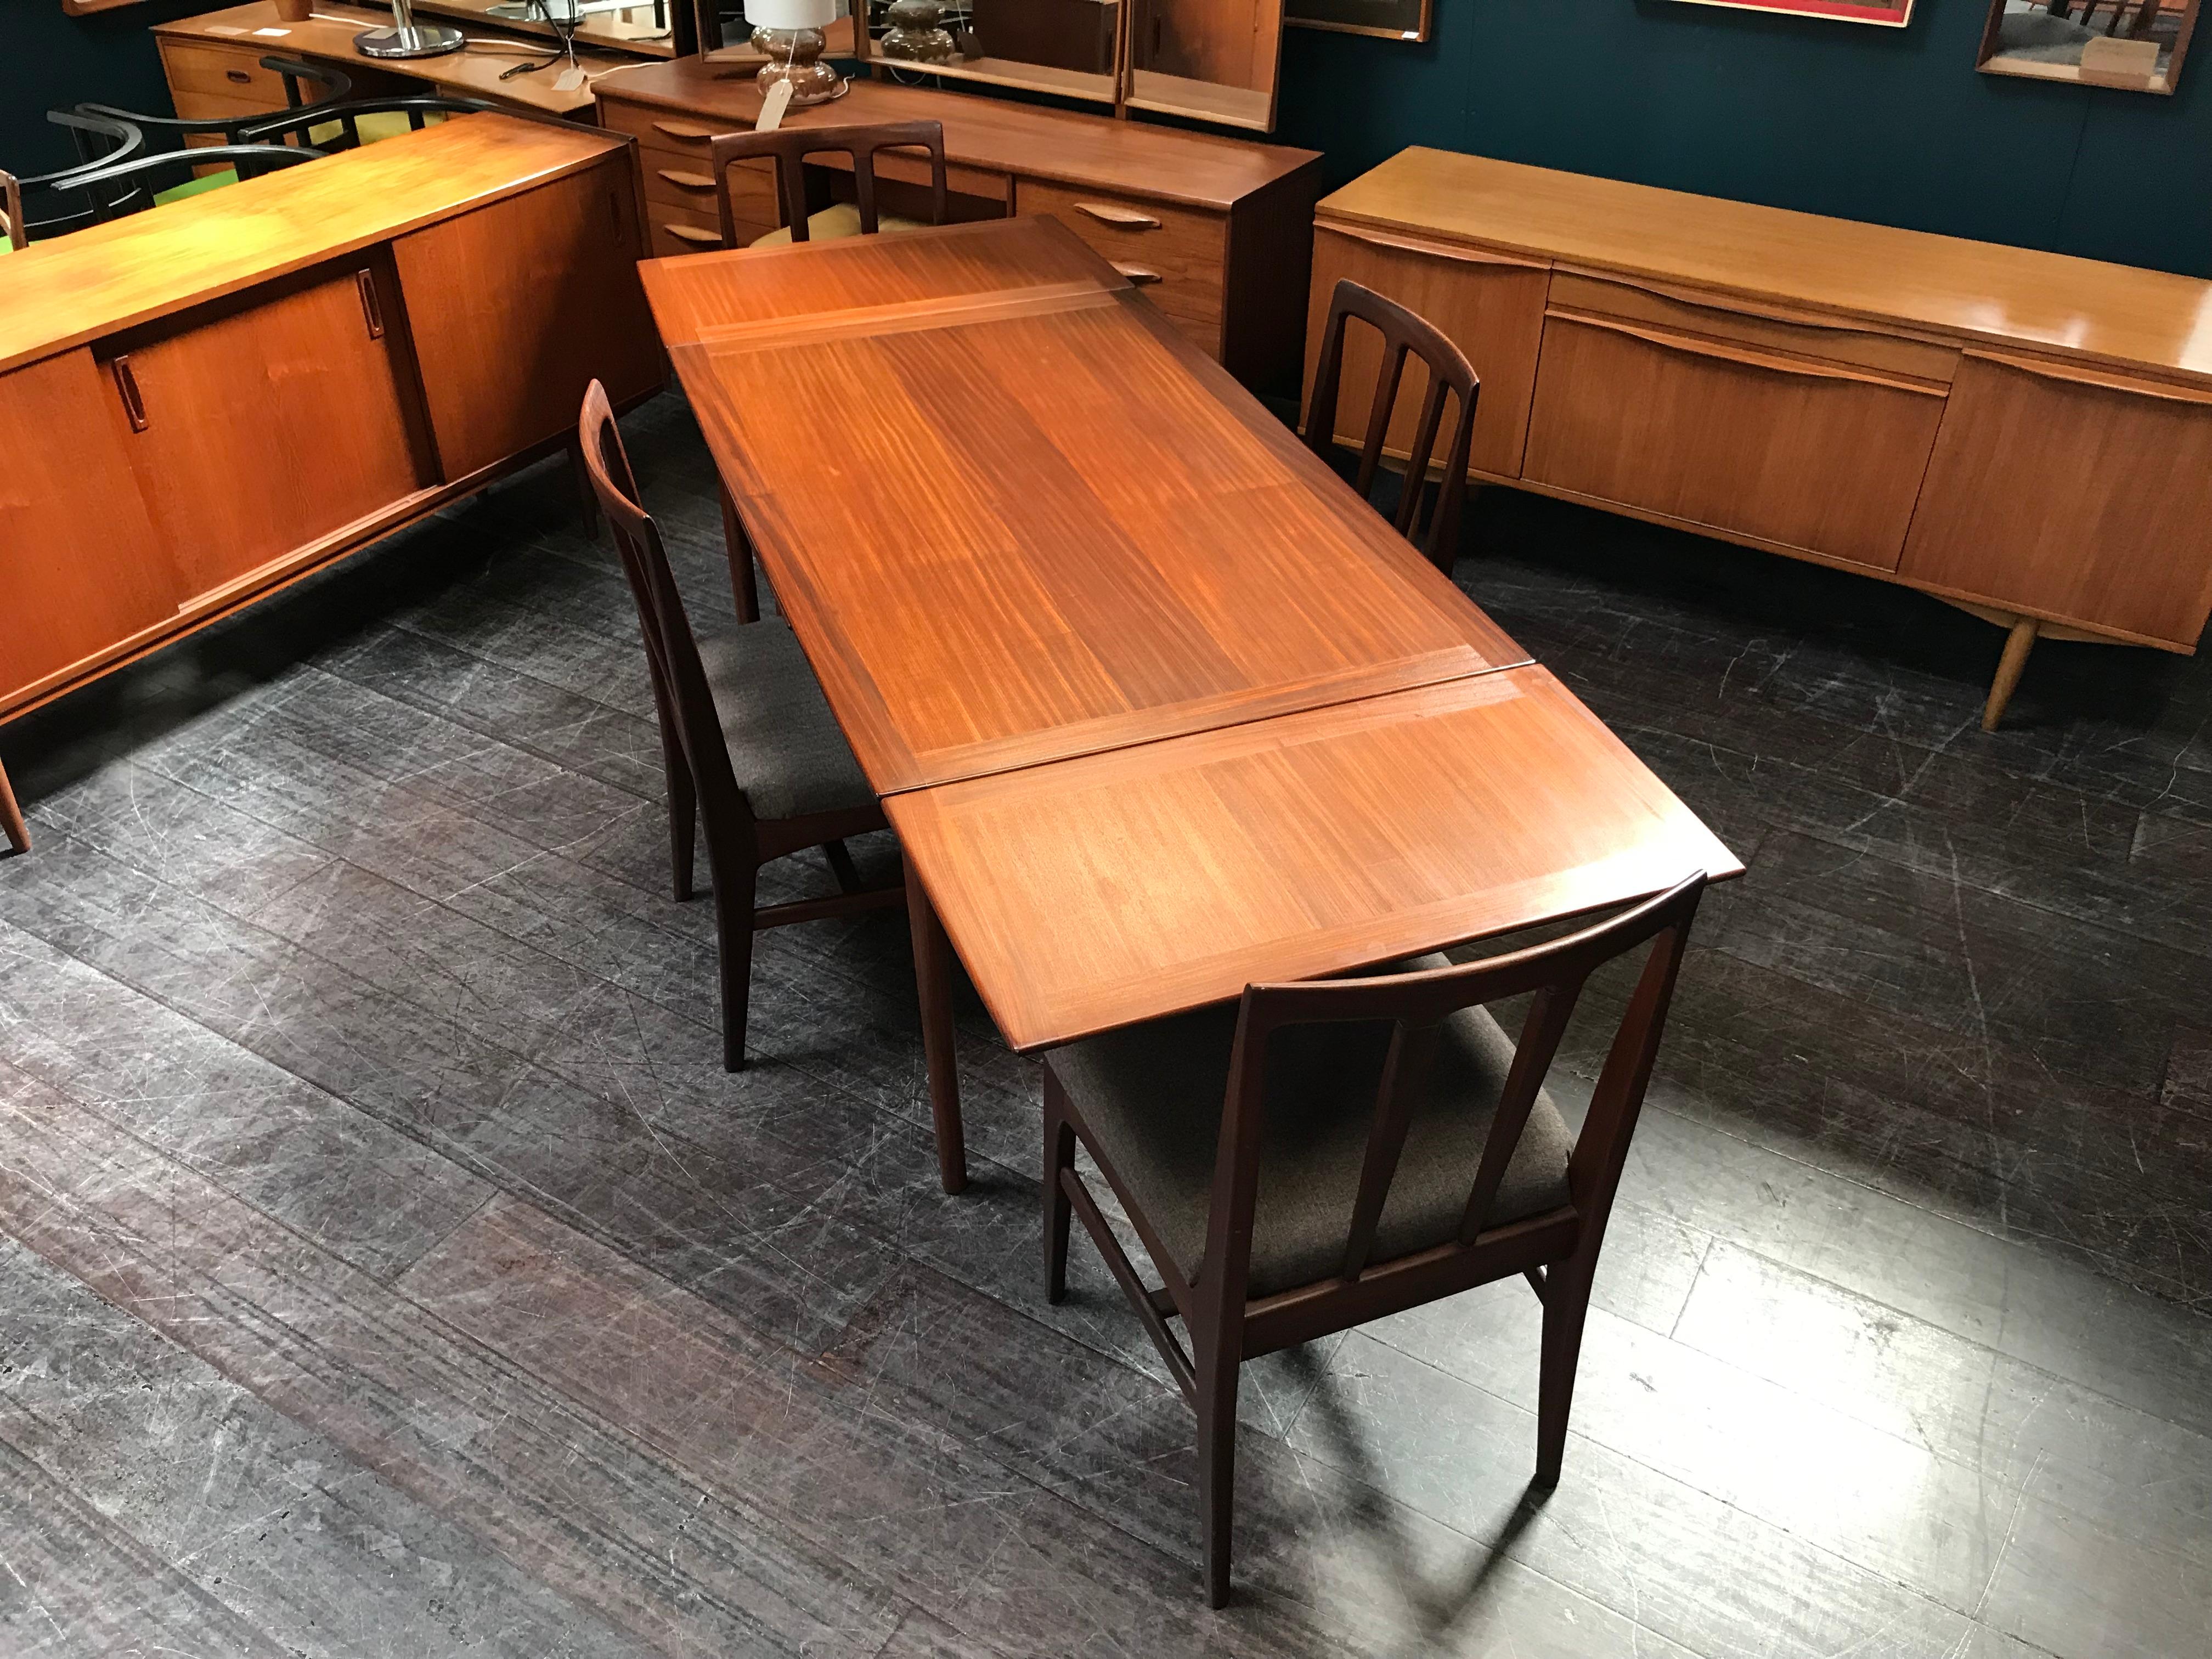 Extending Midcentury Afrormosia Dining Table with 4 Chairs by Younger of Glasgow For Sale 10